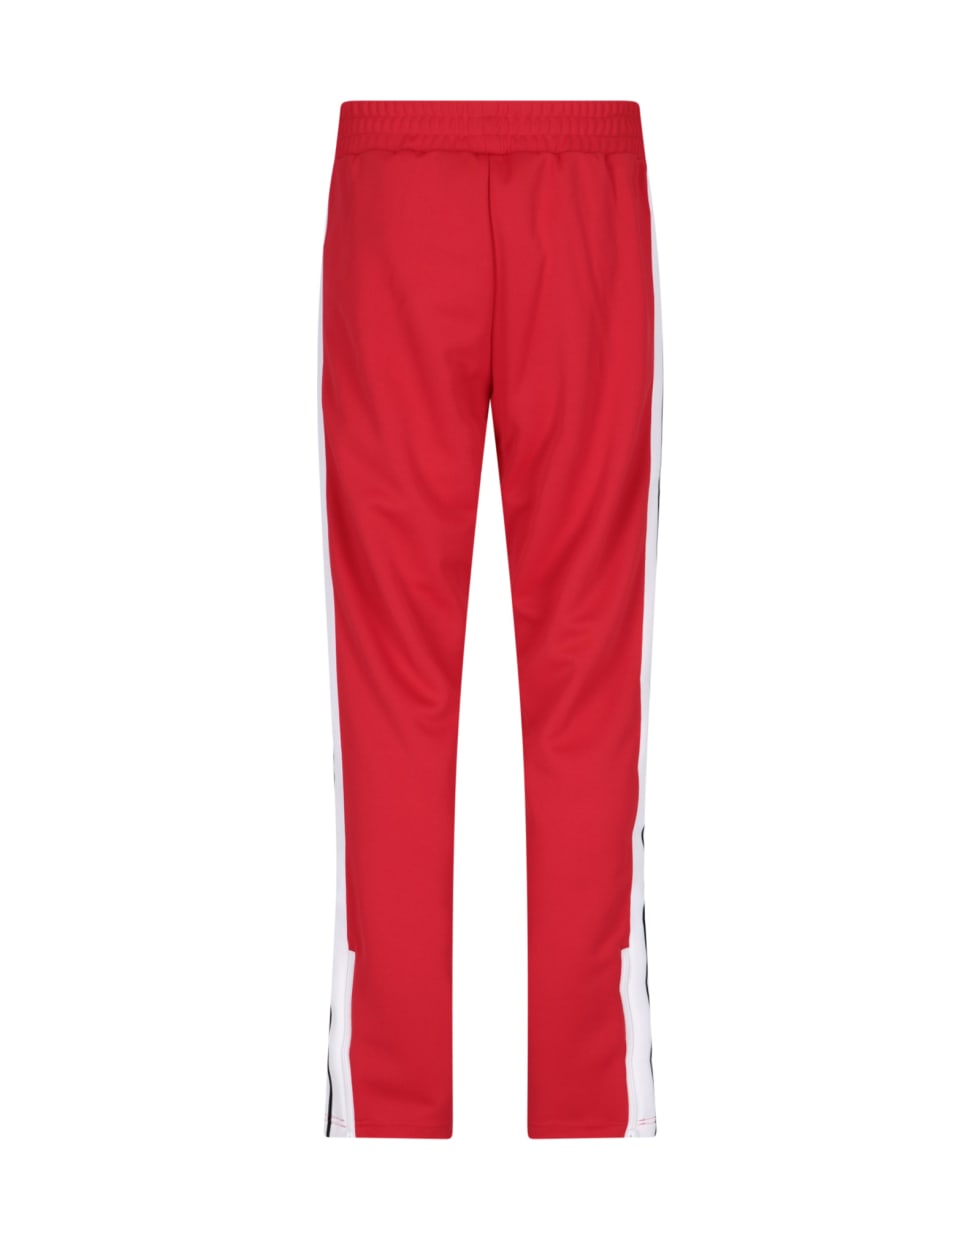 Palm Angels Pants - Red